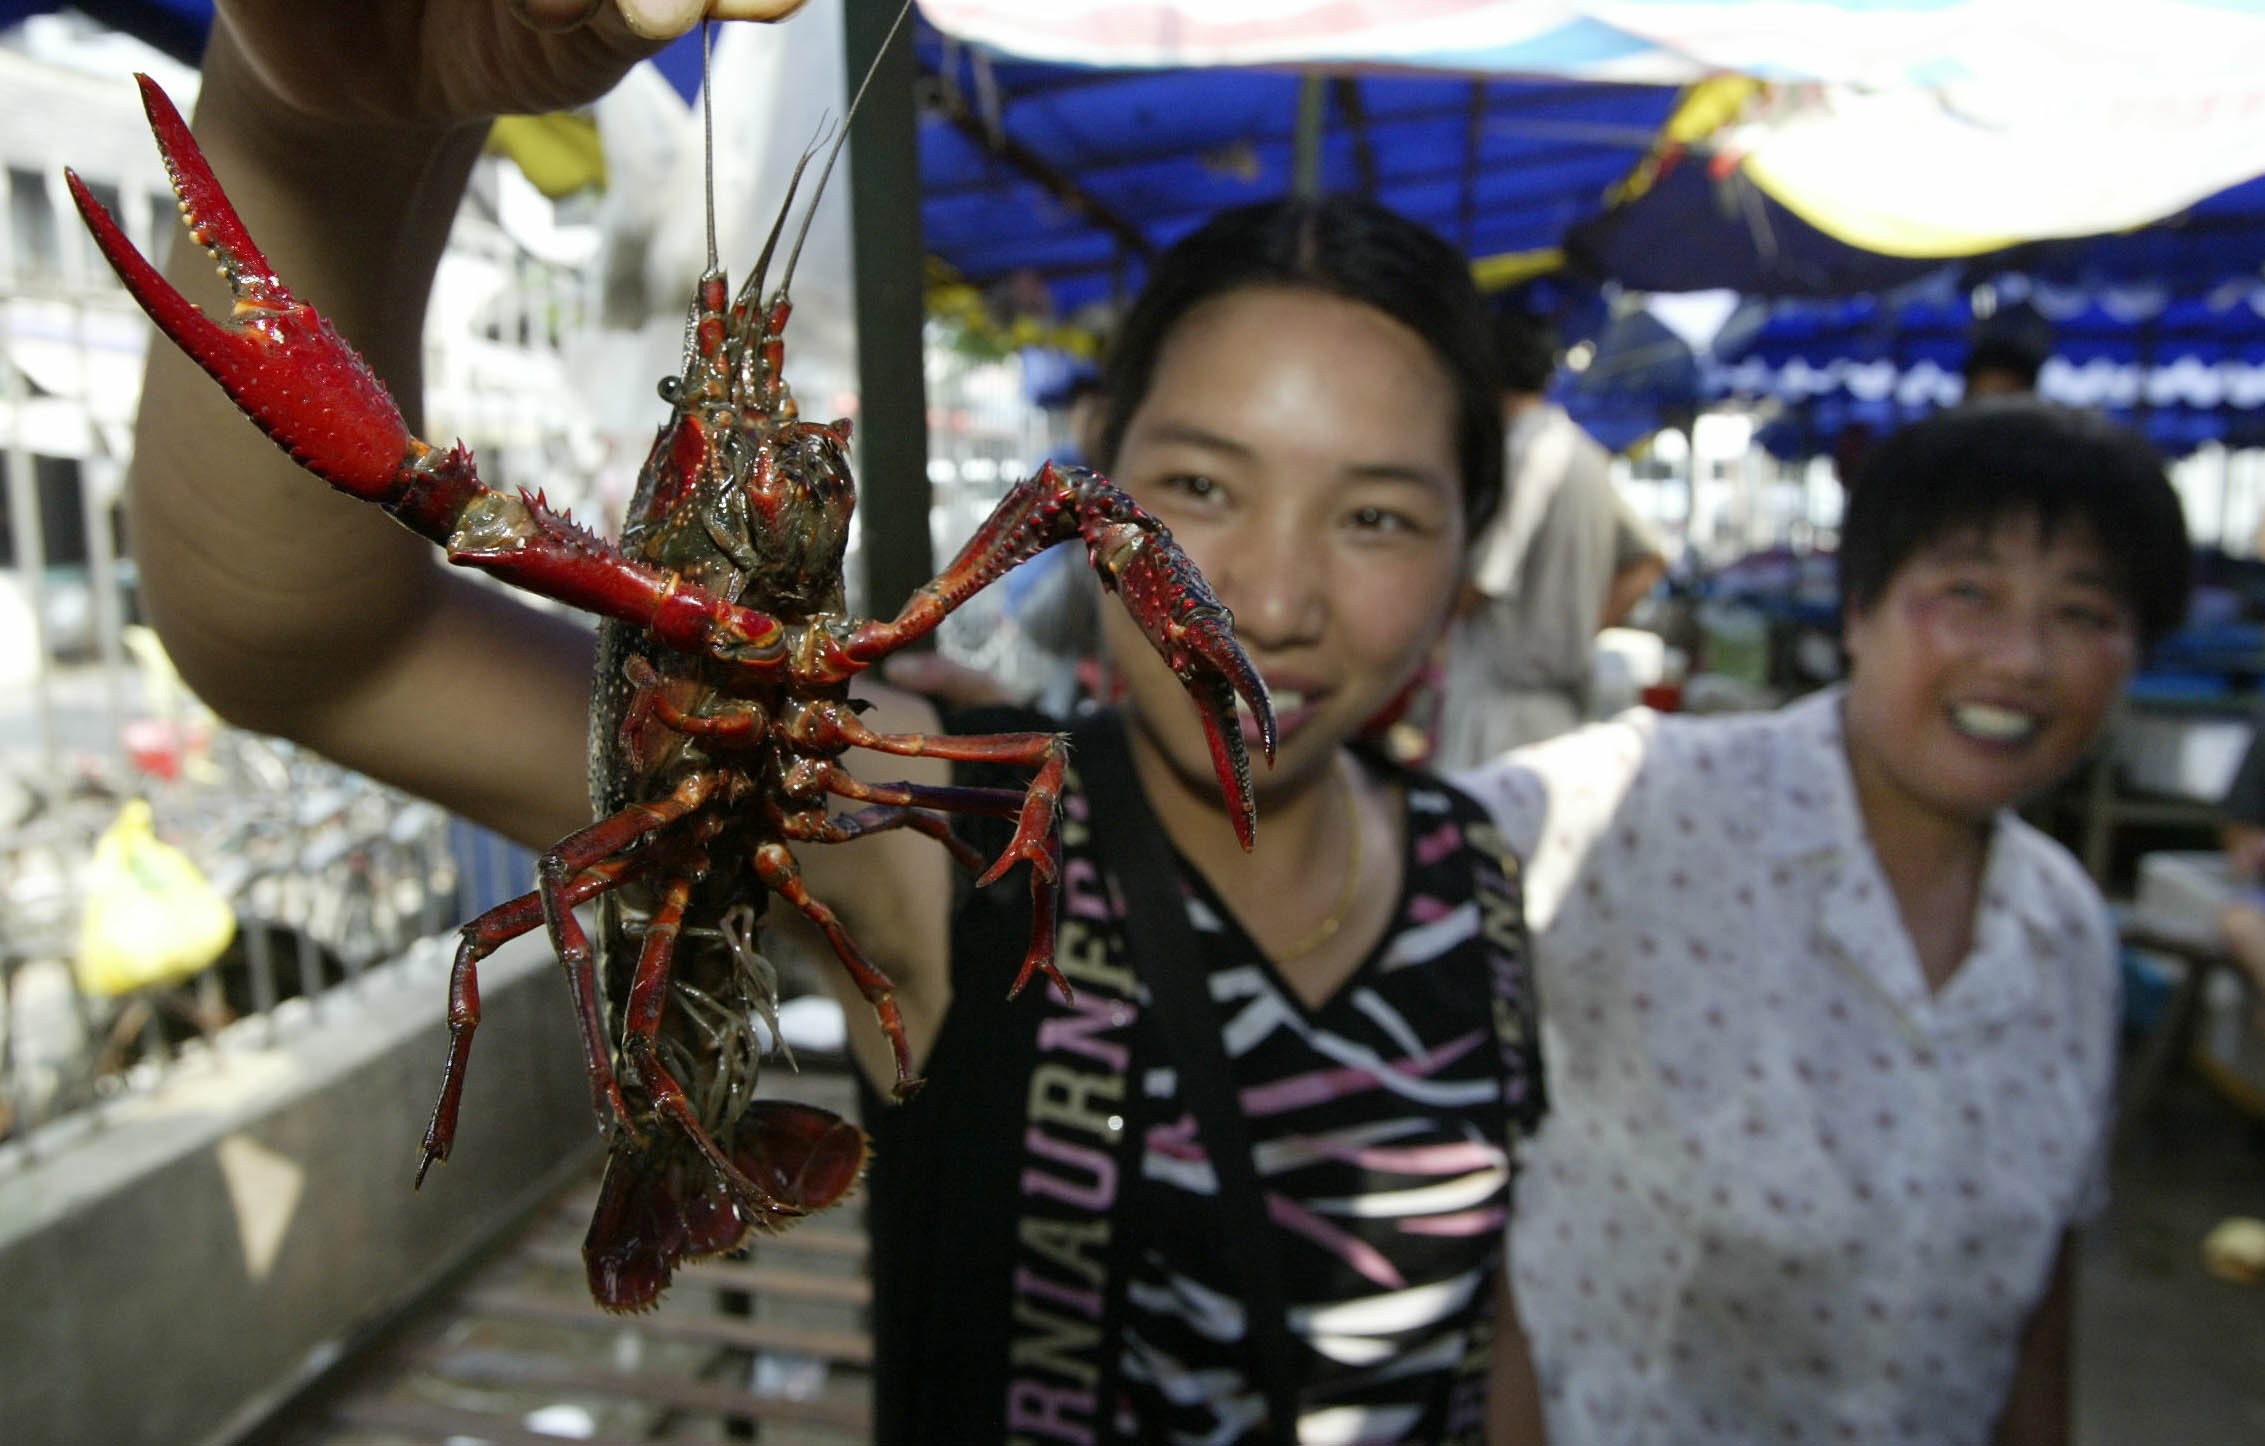 Chinese foodies’ love for crayfish – better known as small lobsters in China – has created a lucrative business for farmers, wholesalers and exporters. The country is now the world’s biggest producer and exporter. Photo: SCMP